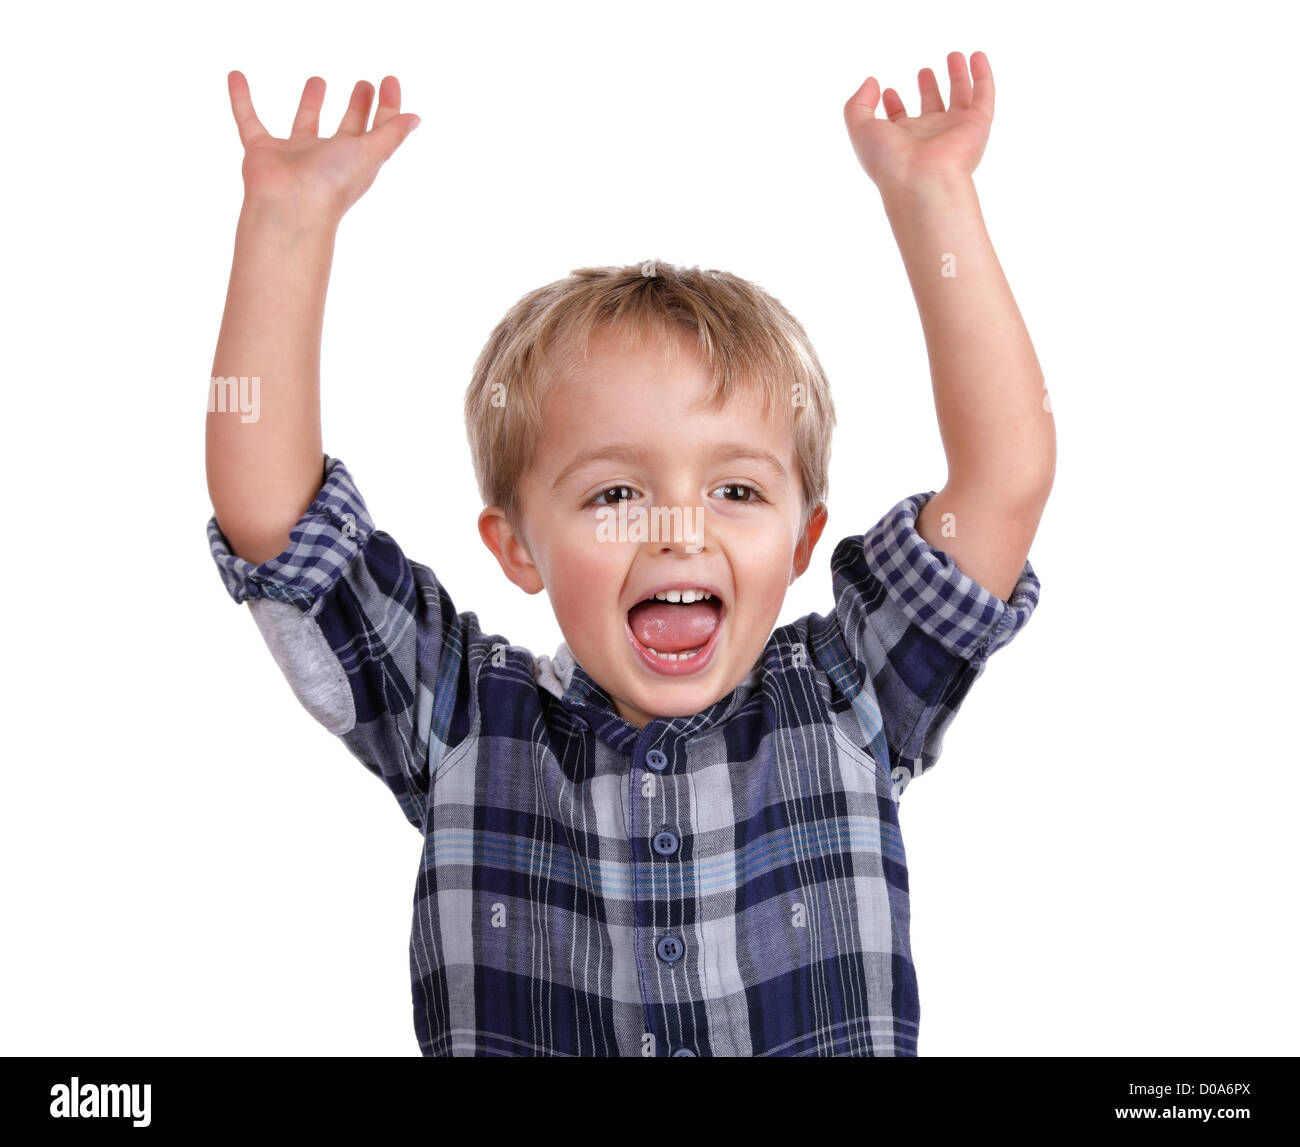 Excited boy with arms raised cheering Stock Photo